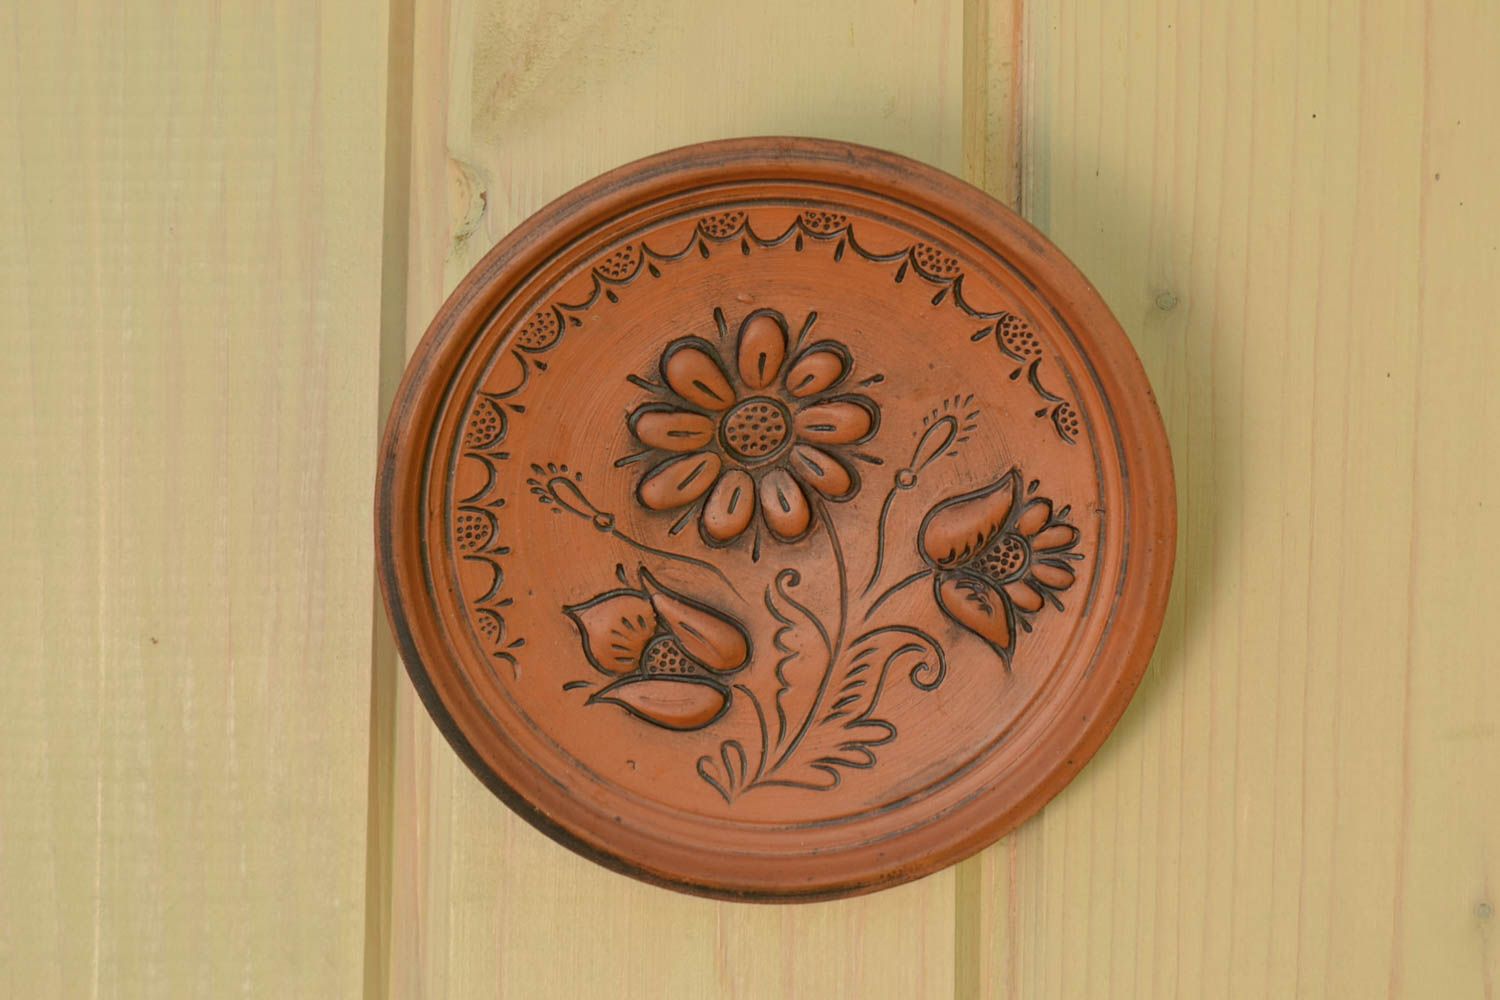 Handmade decorative ceramic wall plate with relief flower image kilned with milk photo 1